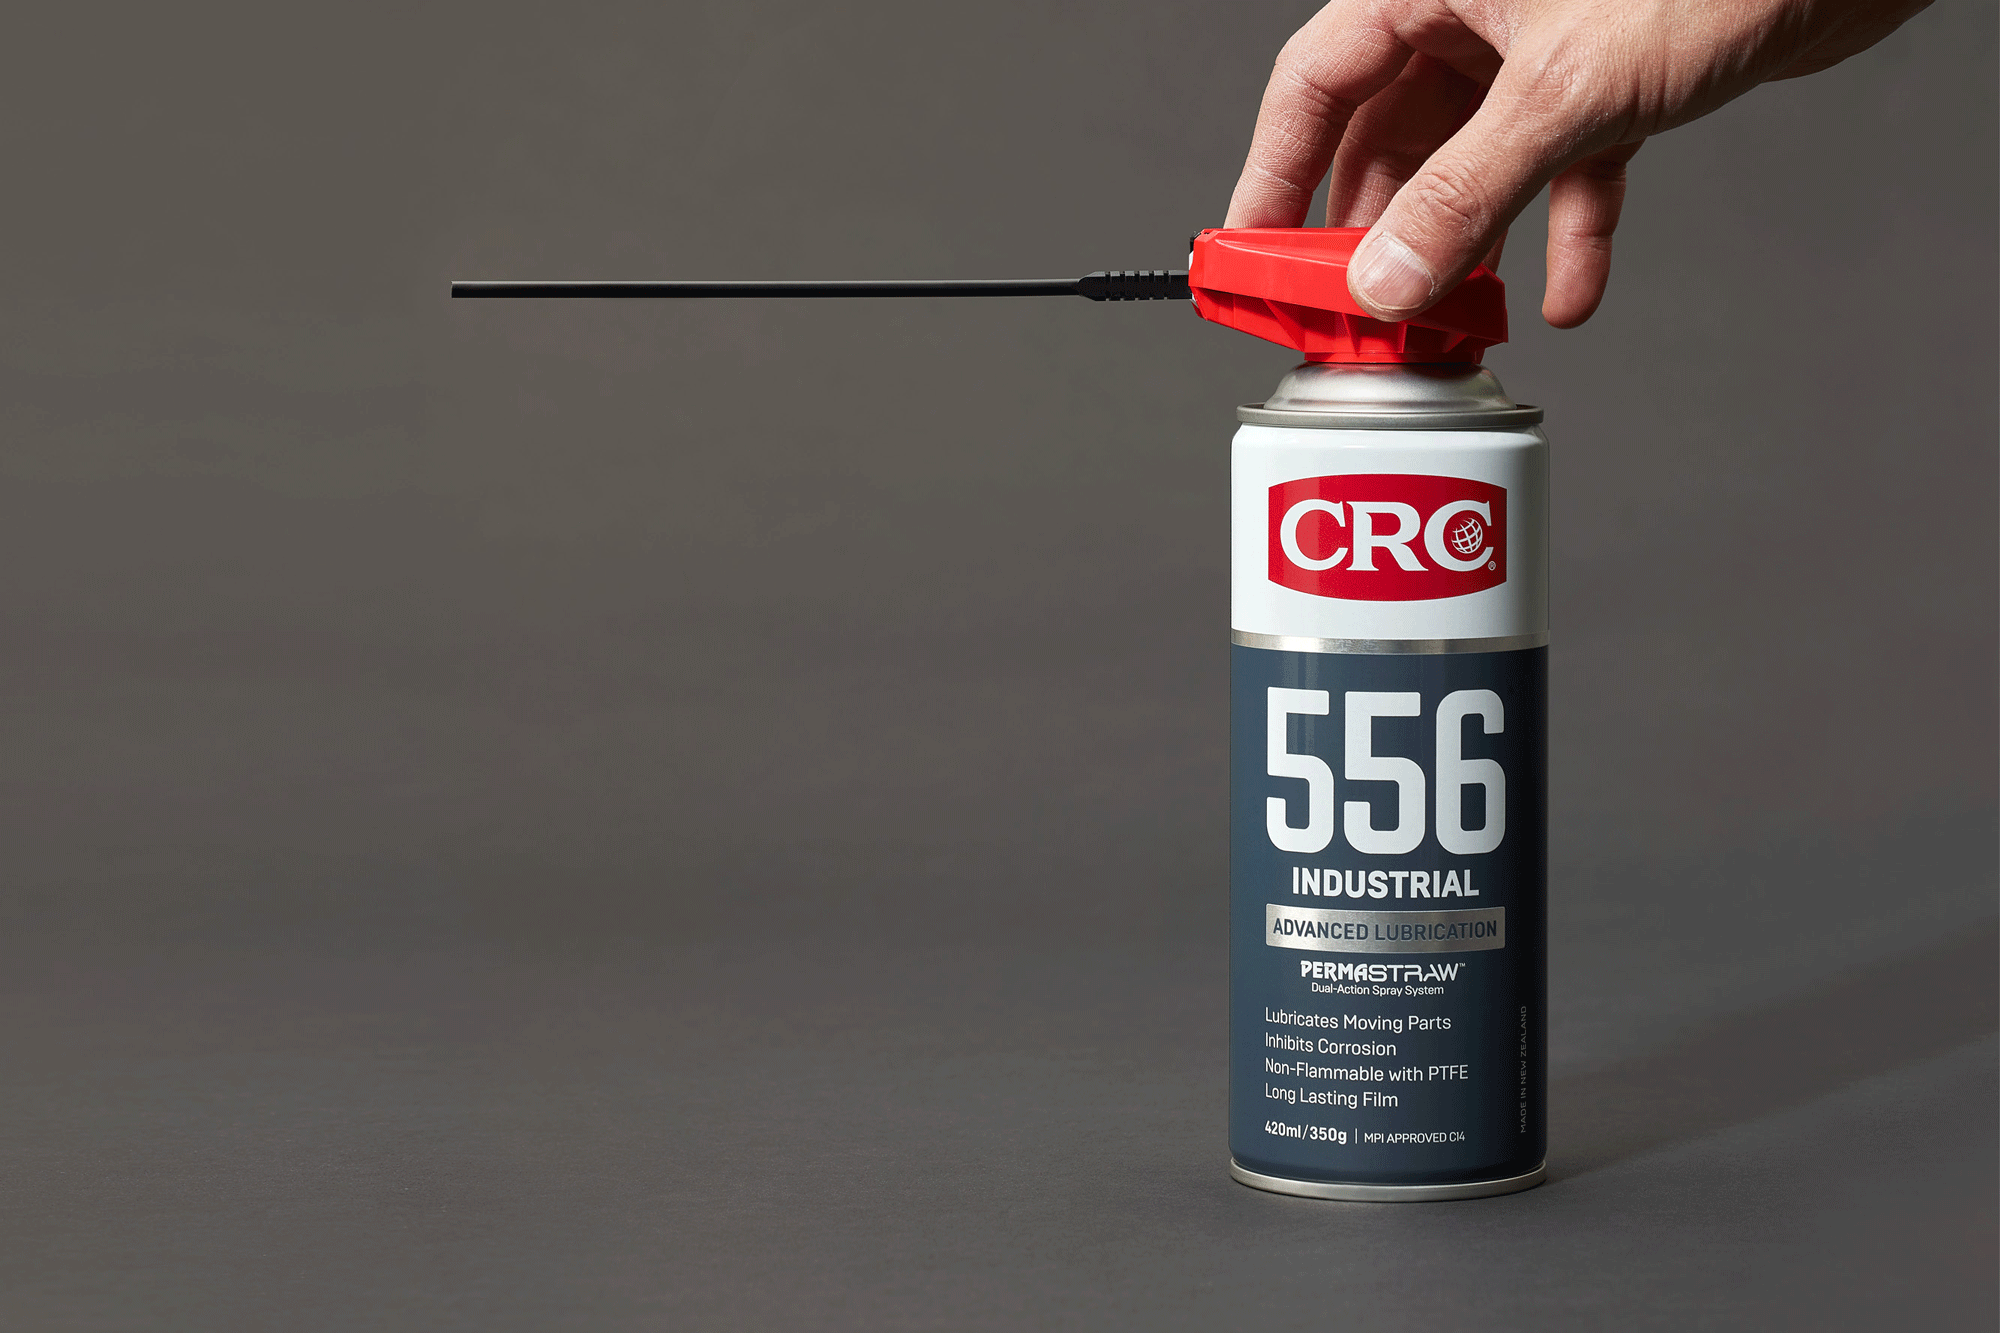 onfire design CRC 556 packaging redesign 8